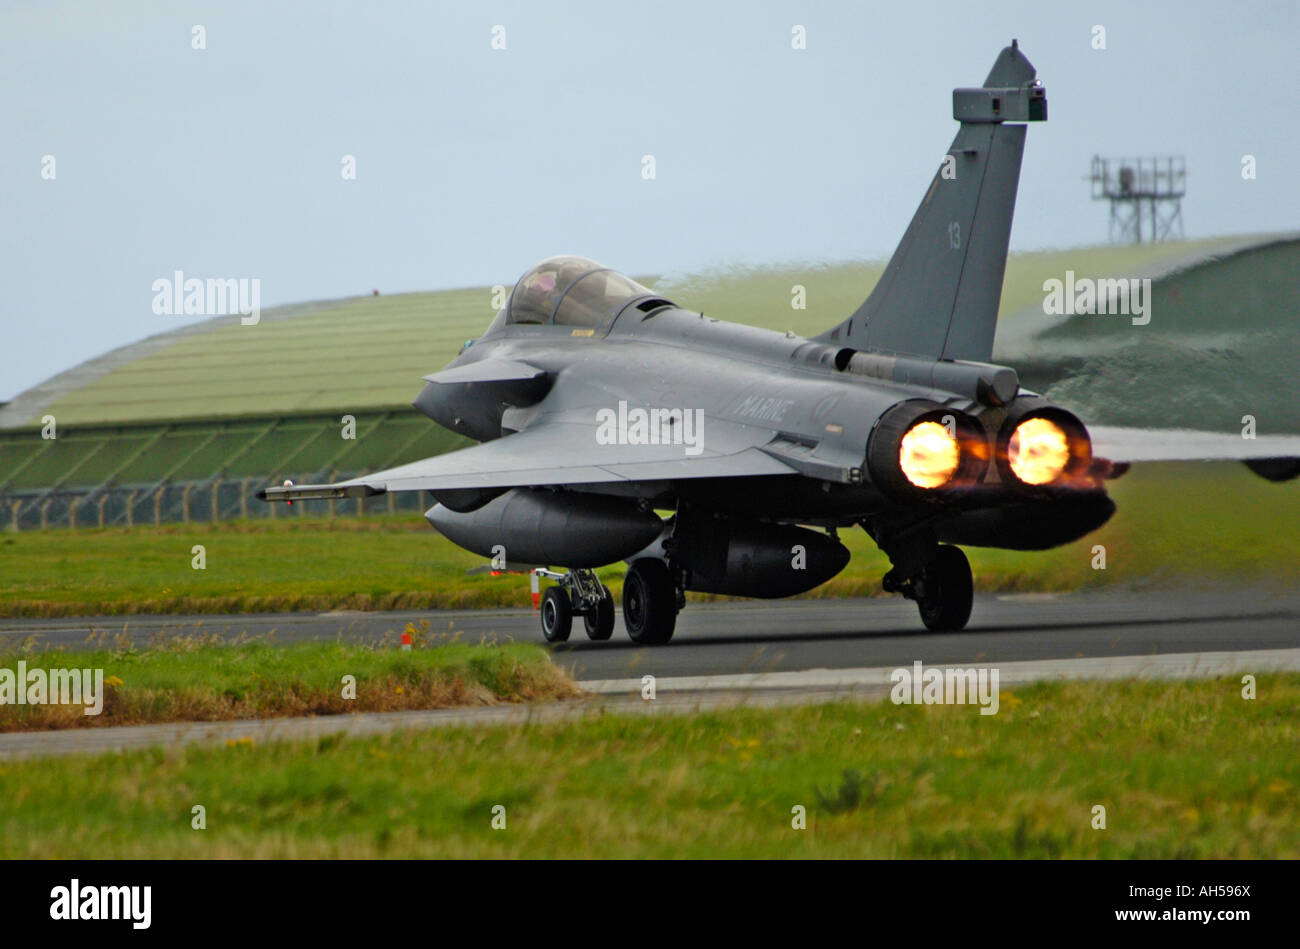 The Dassault Rafale M (or 'Squall' in English) is a French twin-engined delta-wing highly agile multi-role fighter aircraft Stock Photo